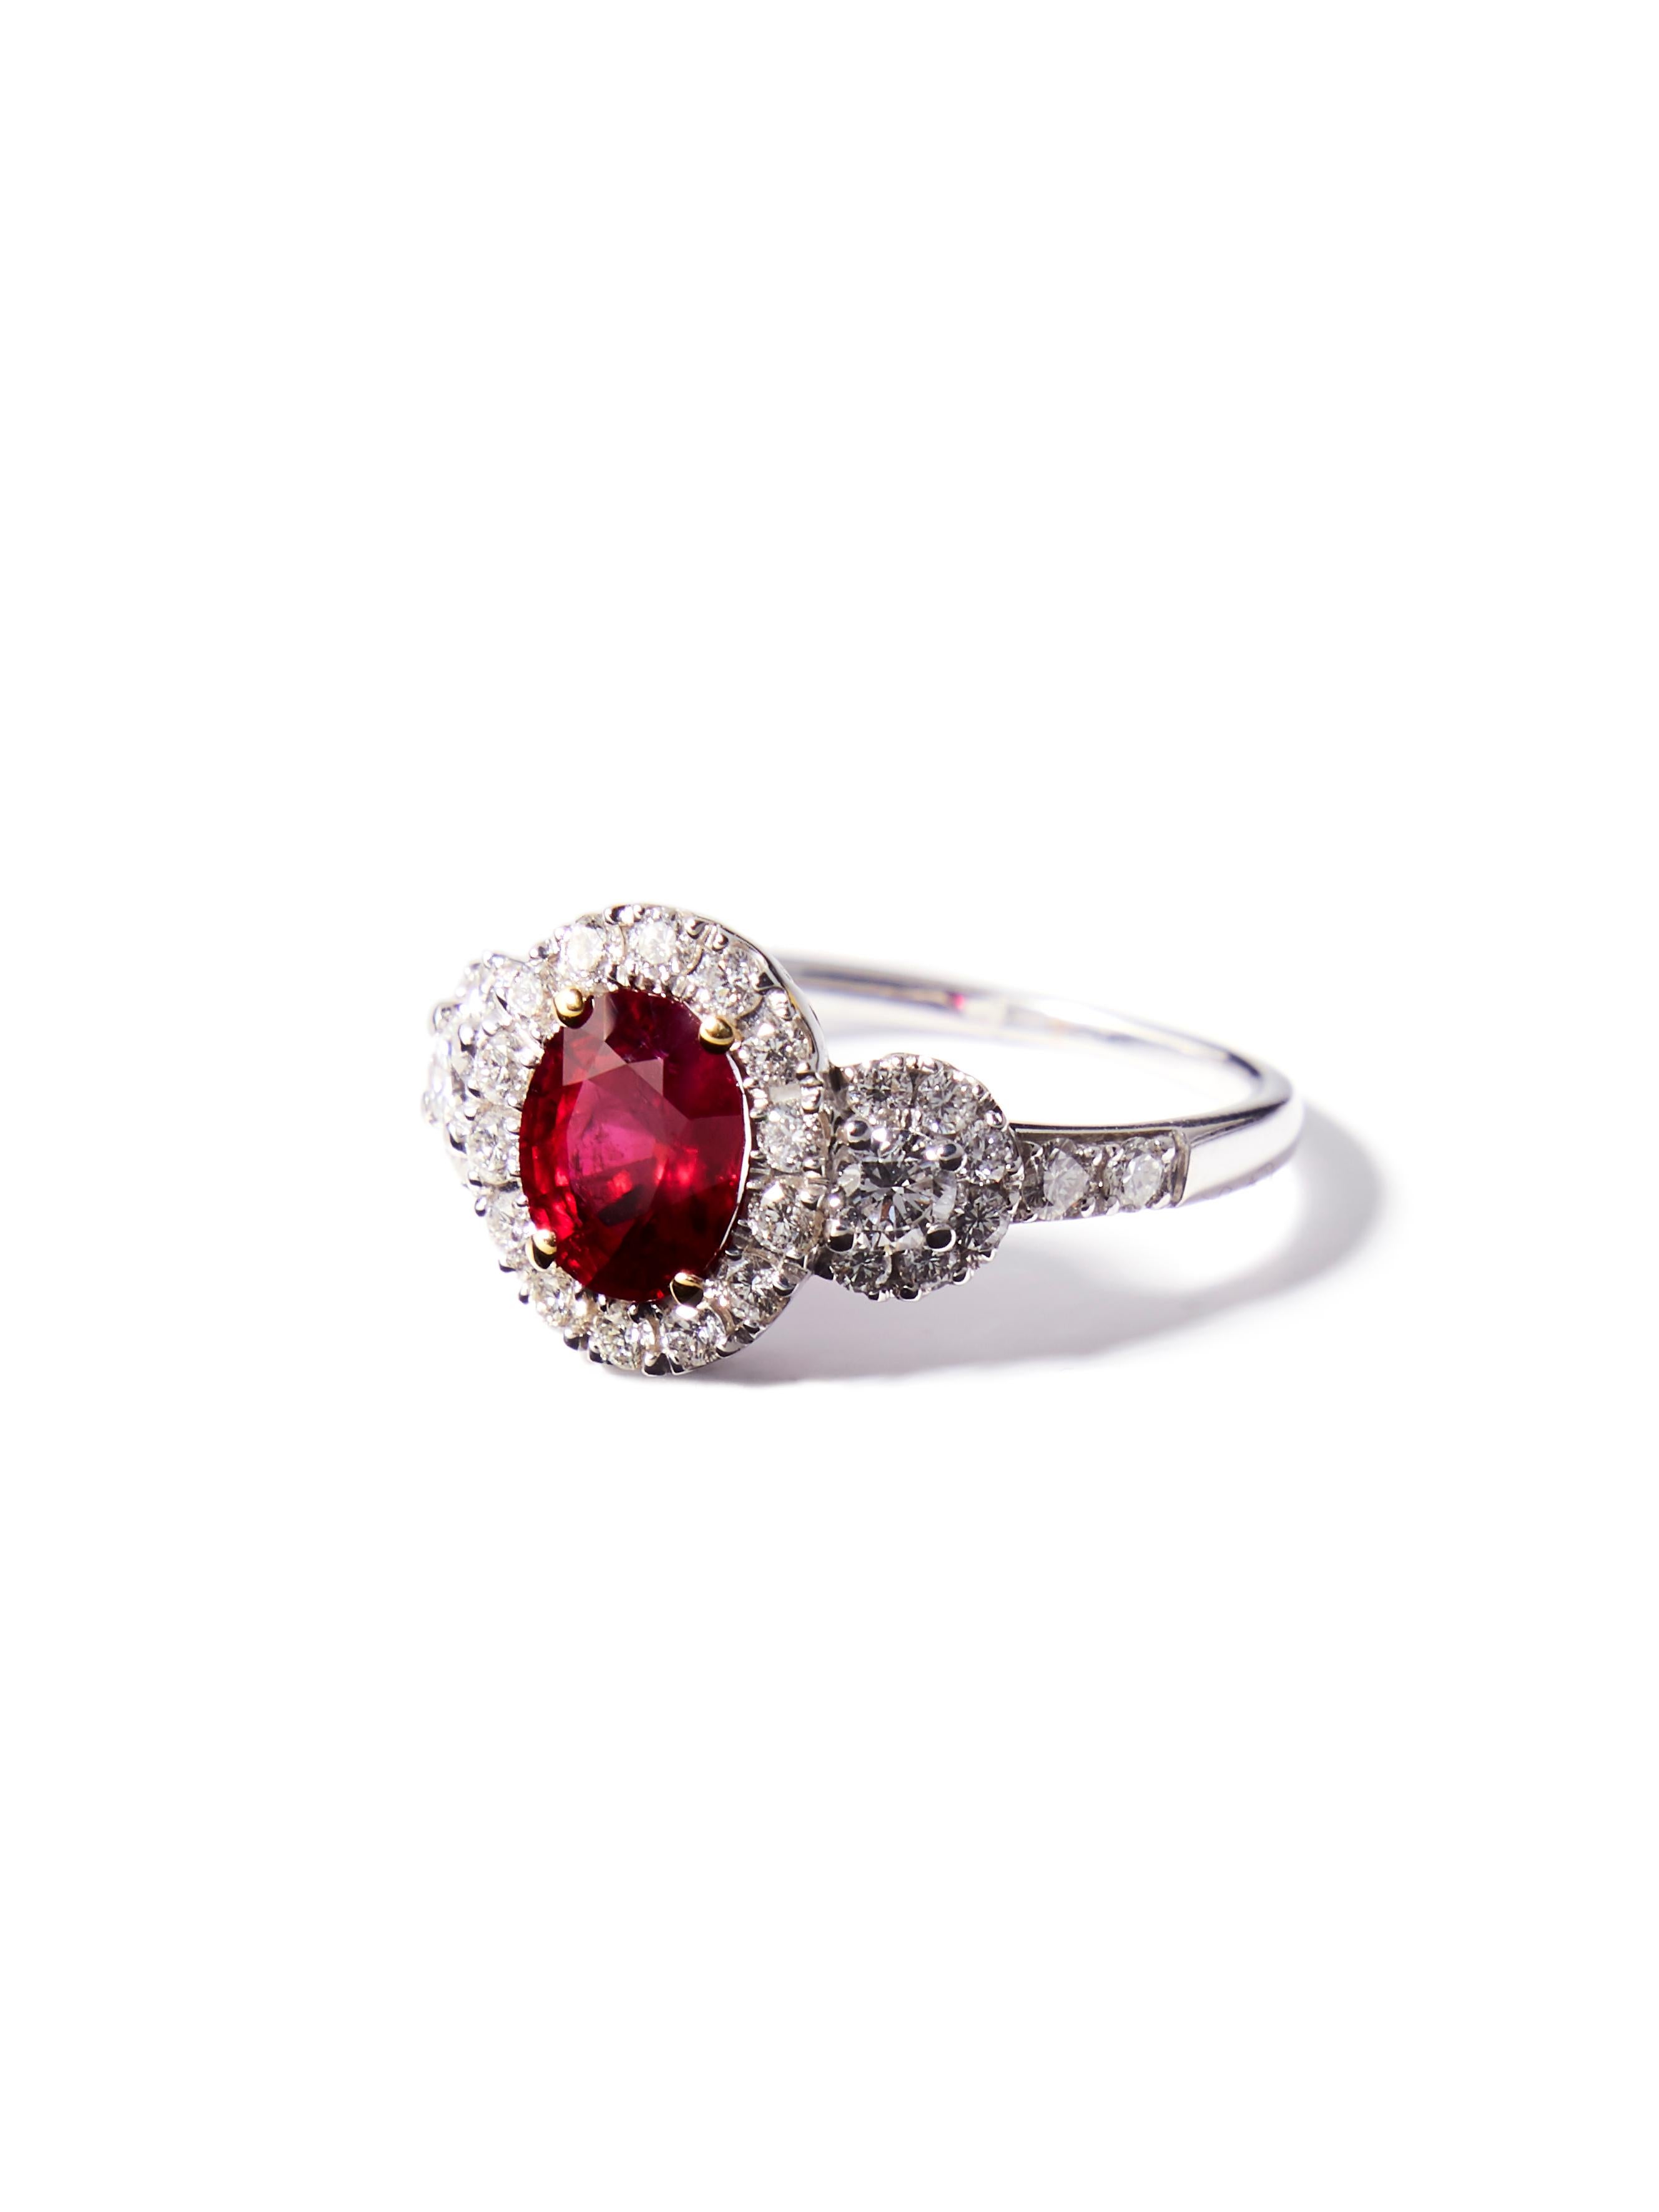 This 18 karat white gold ring features an untreated strong to deep red Ruby weighing 1.40 carat. The country of origin of the ruby has been determined to be Burma, known since early medieval times as the provenance of the best rubies worldwide.

Two